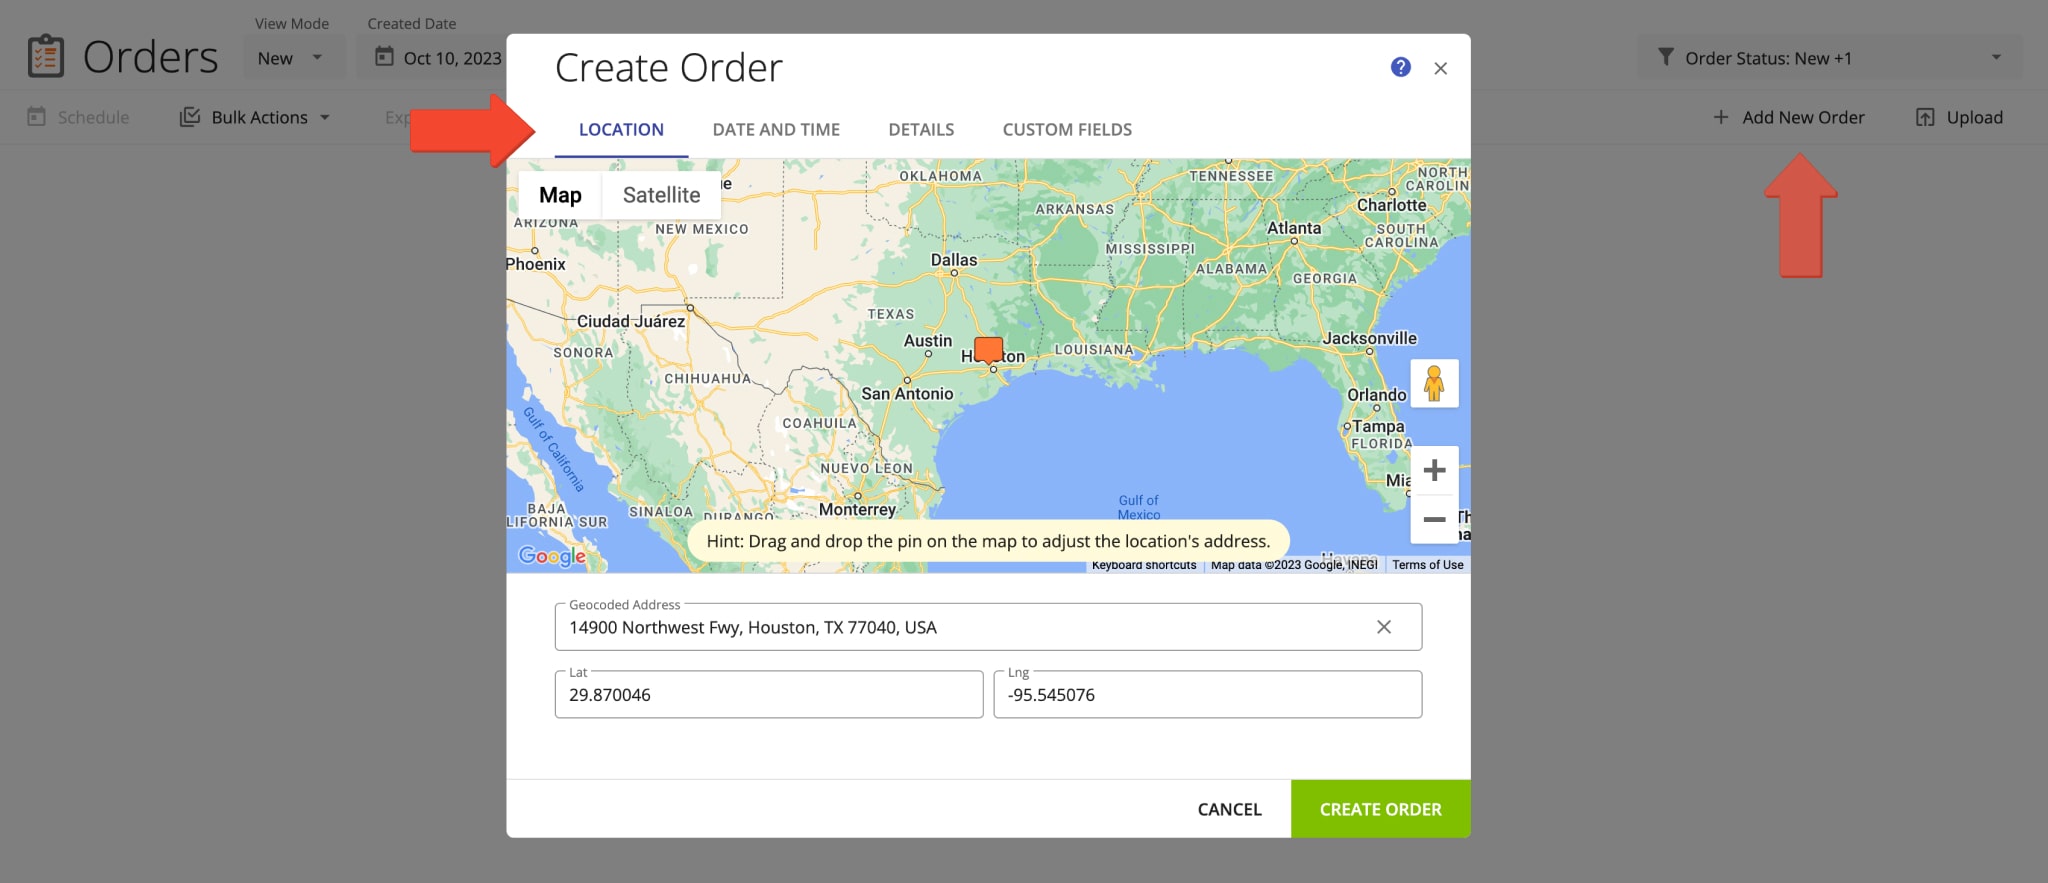 Manually create new orders with the Scheduled status in Route4Me's Order Delivery Management System.